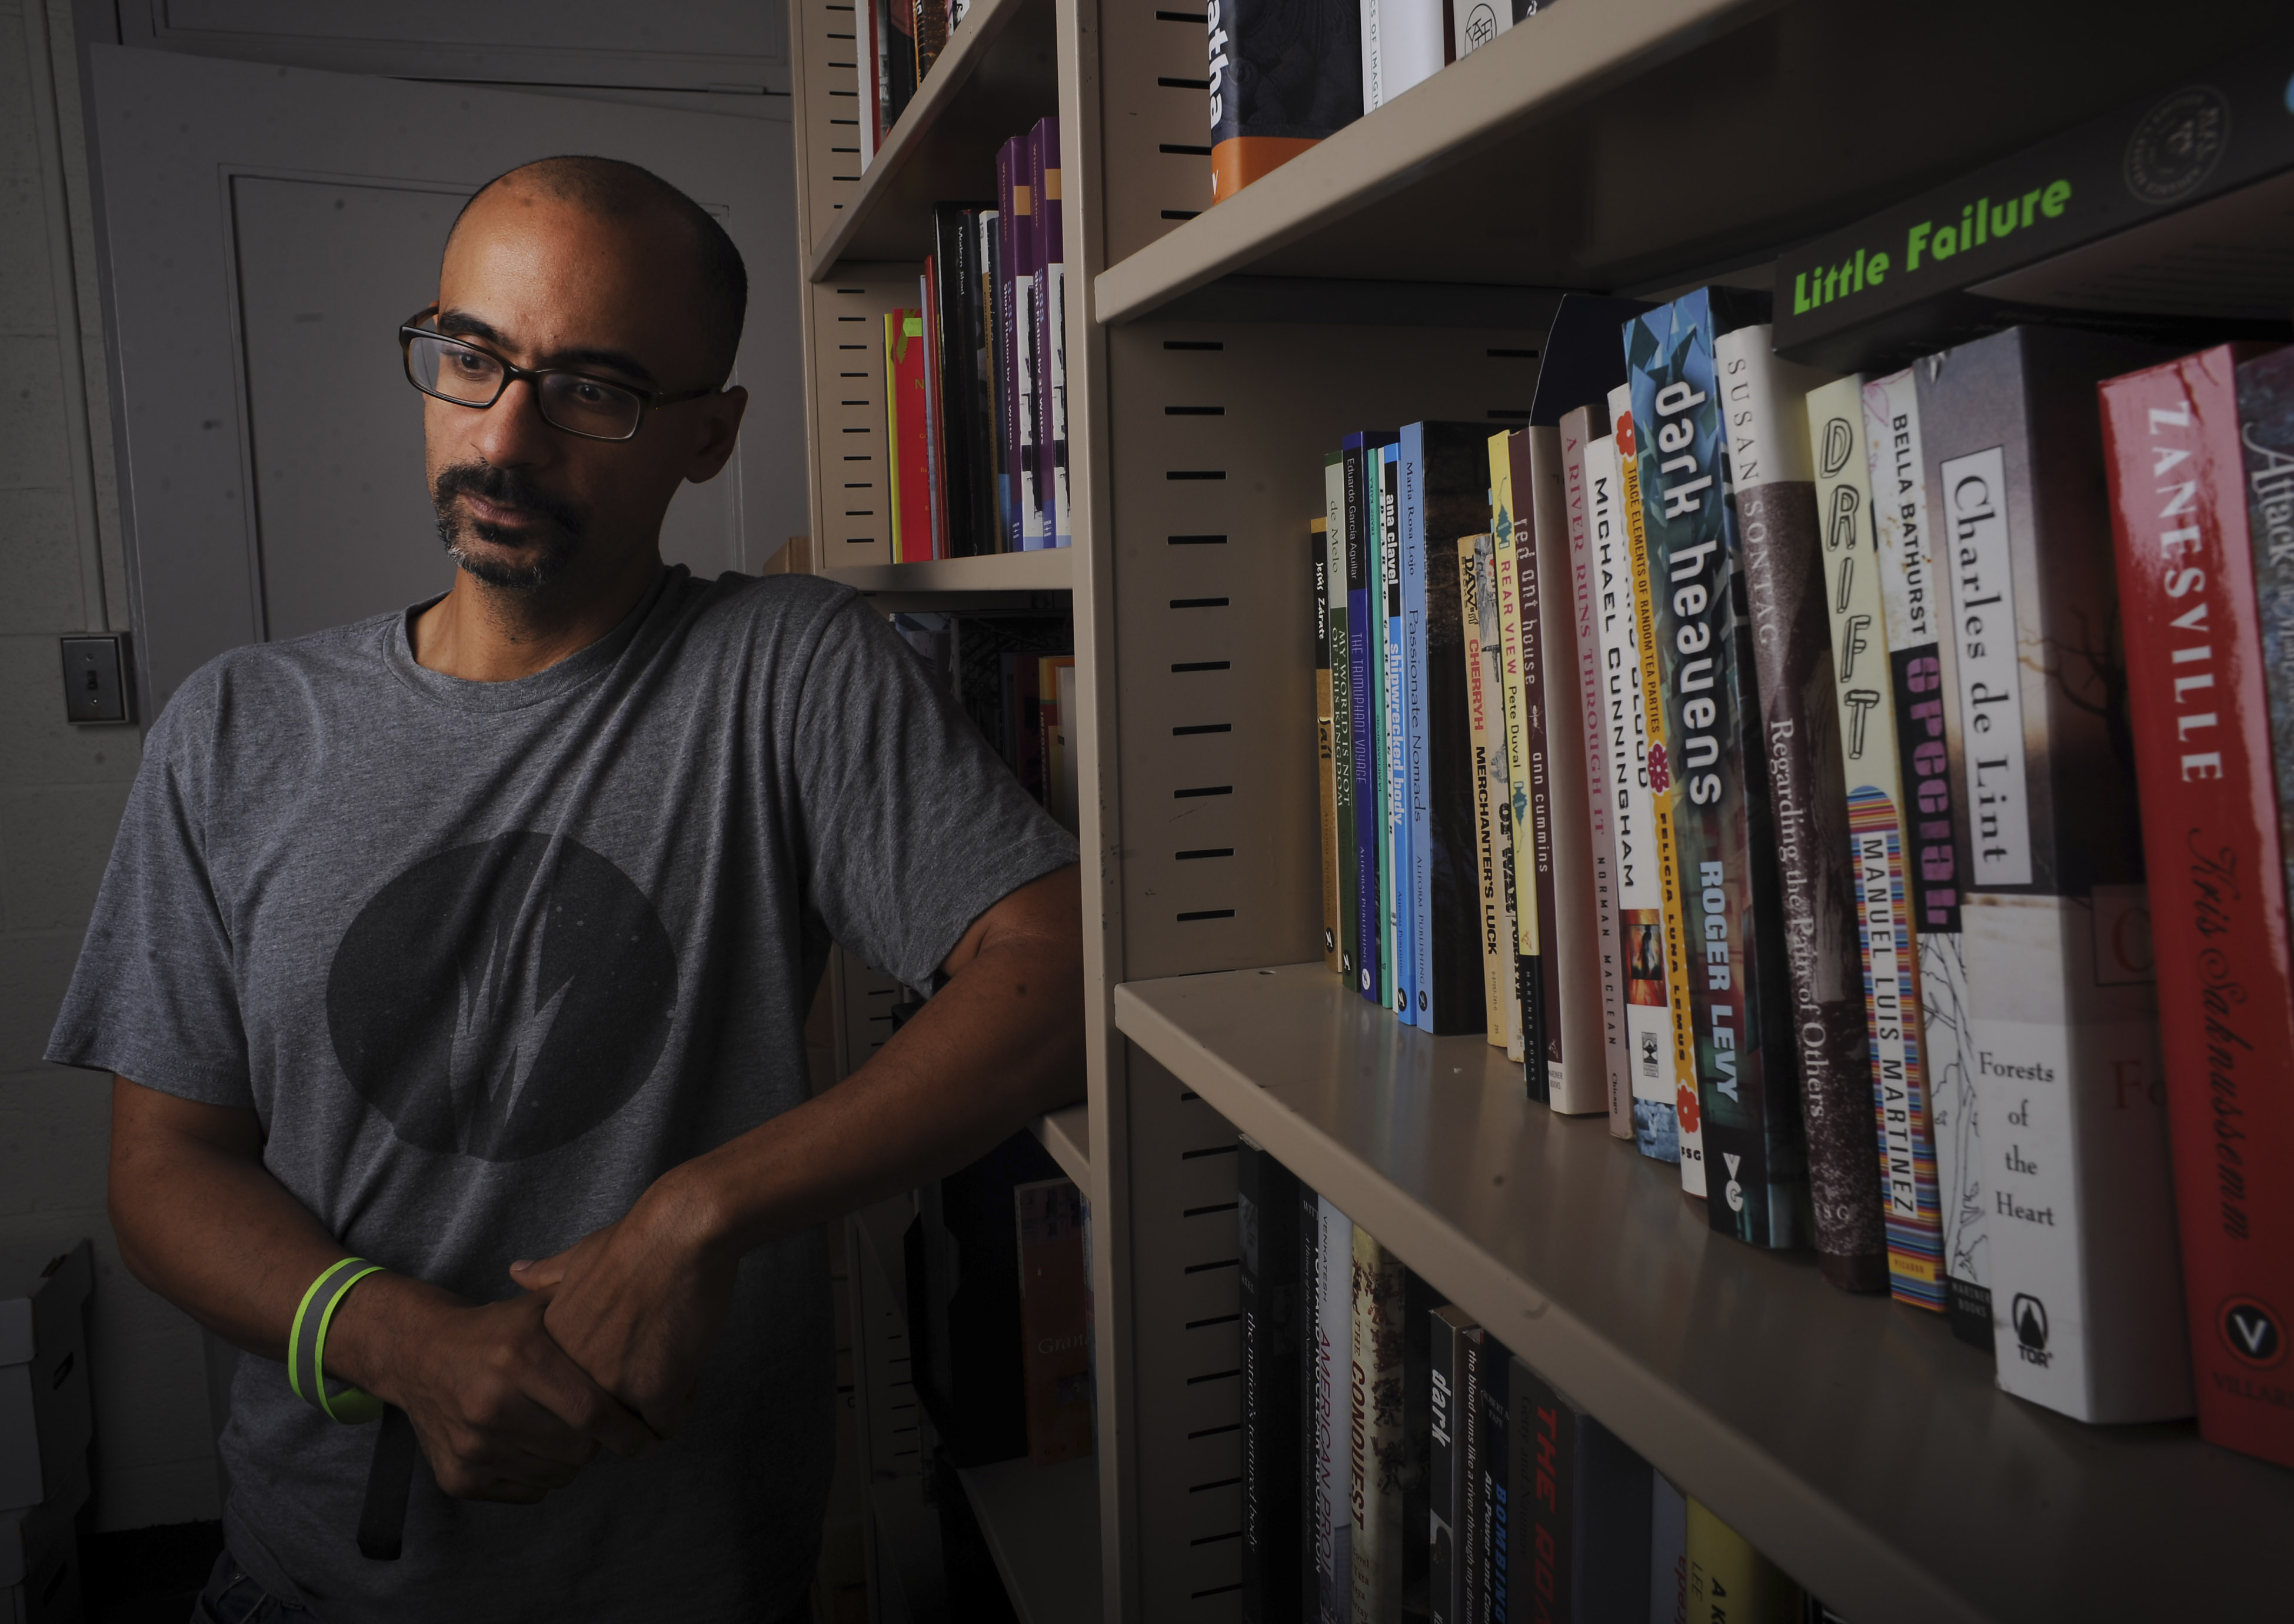 Pulitzer Prize writer Junot Diaz was photographed at his MIT office on September 12, 2013. (Boston Globe&mdash;Boston Globe via Getty Images)